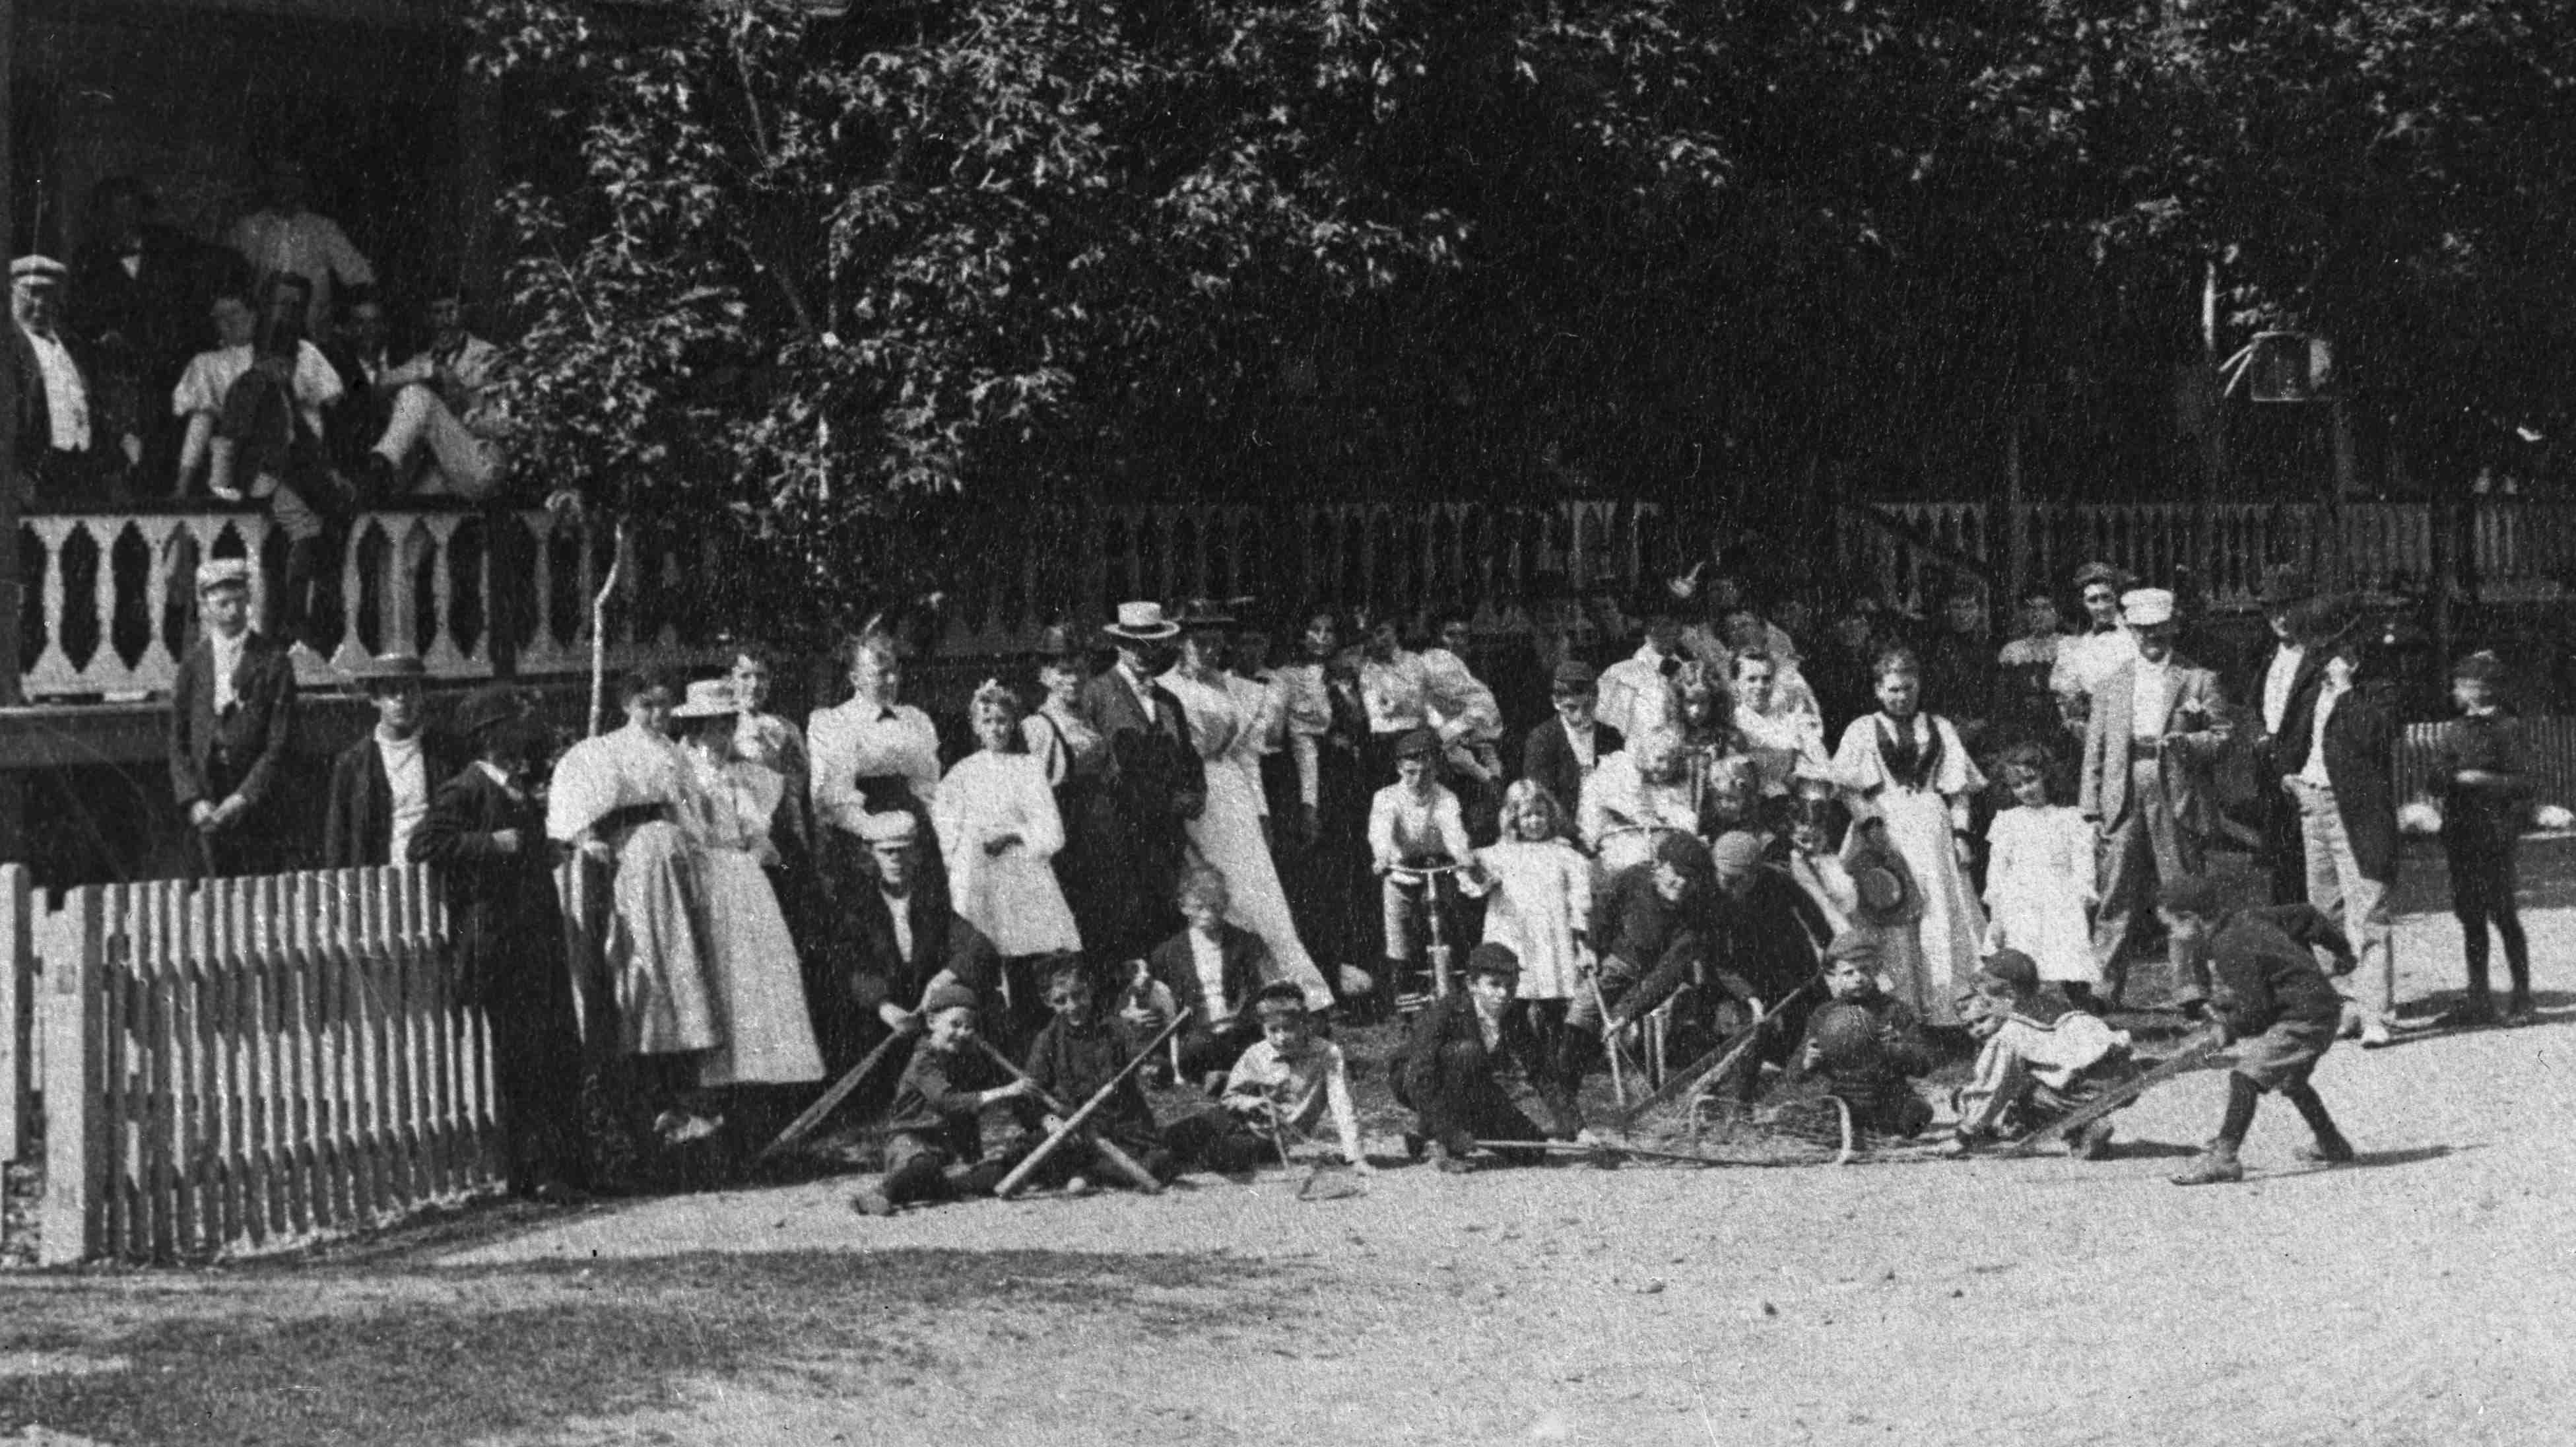 Group photograph in front of a large porch, with children showing off many pieces of sports equipment.